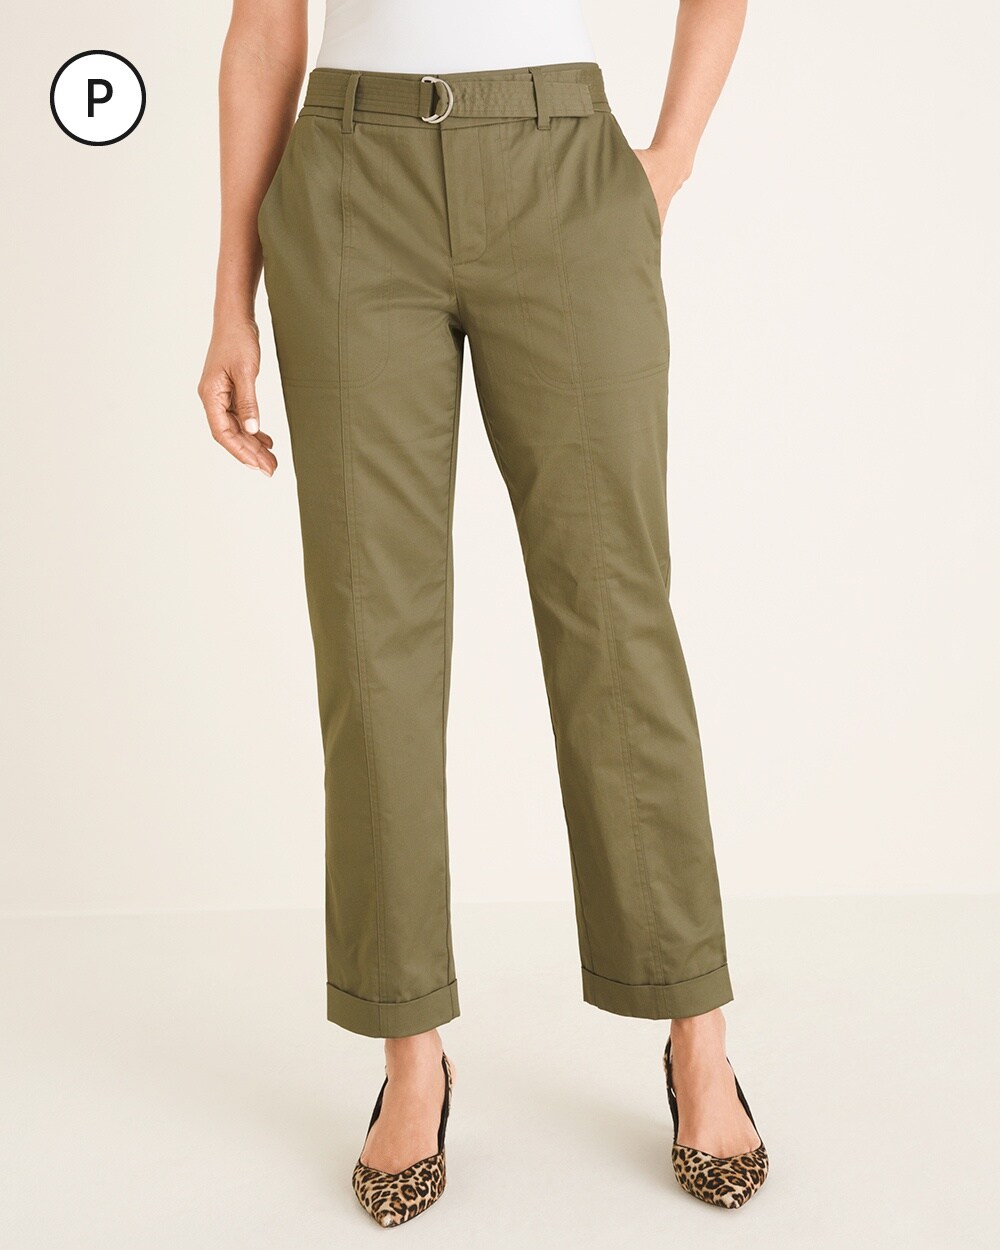 Petite Belted Utility Ankle Pants